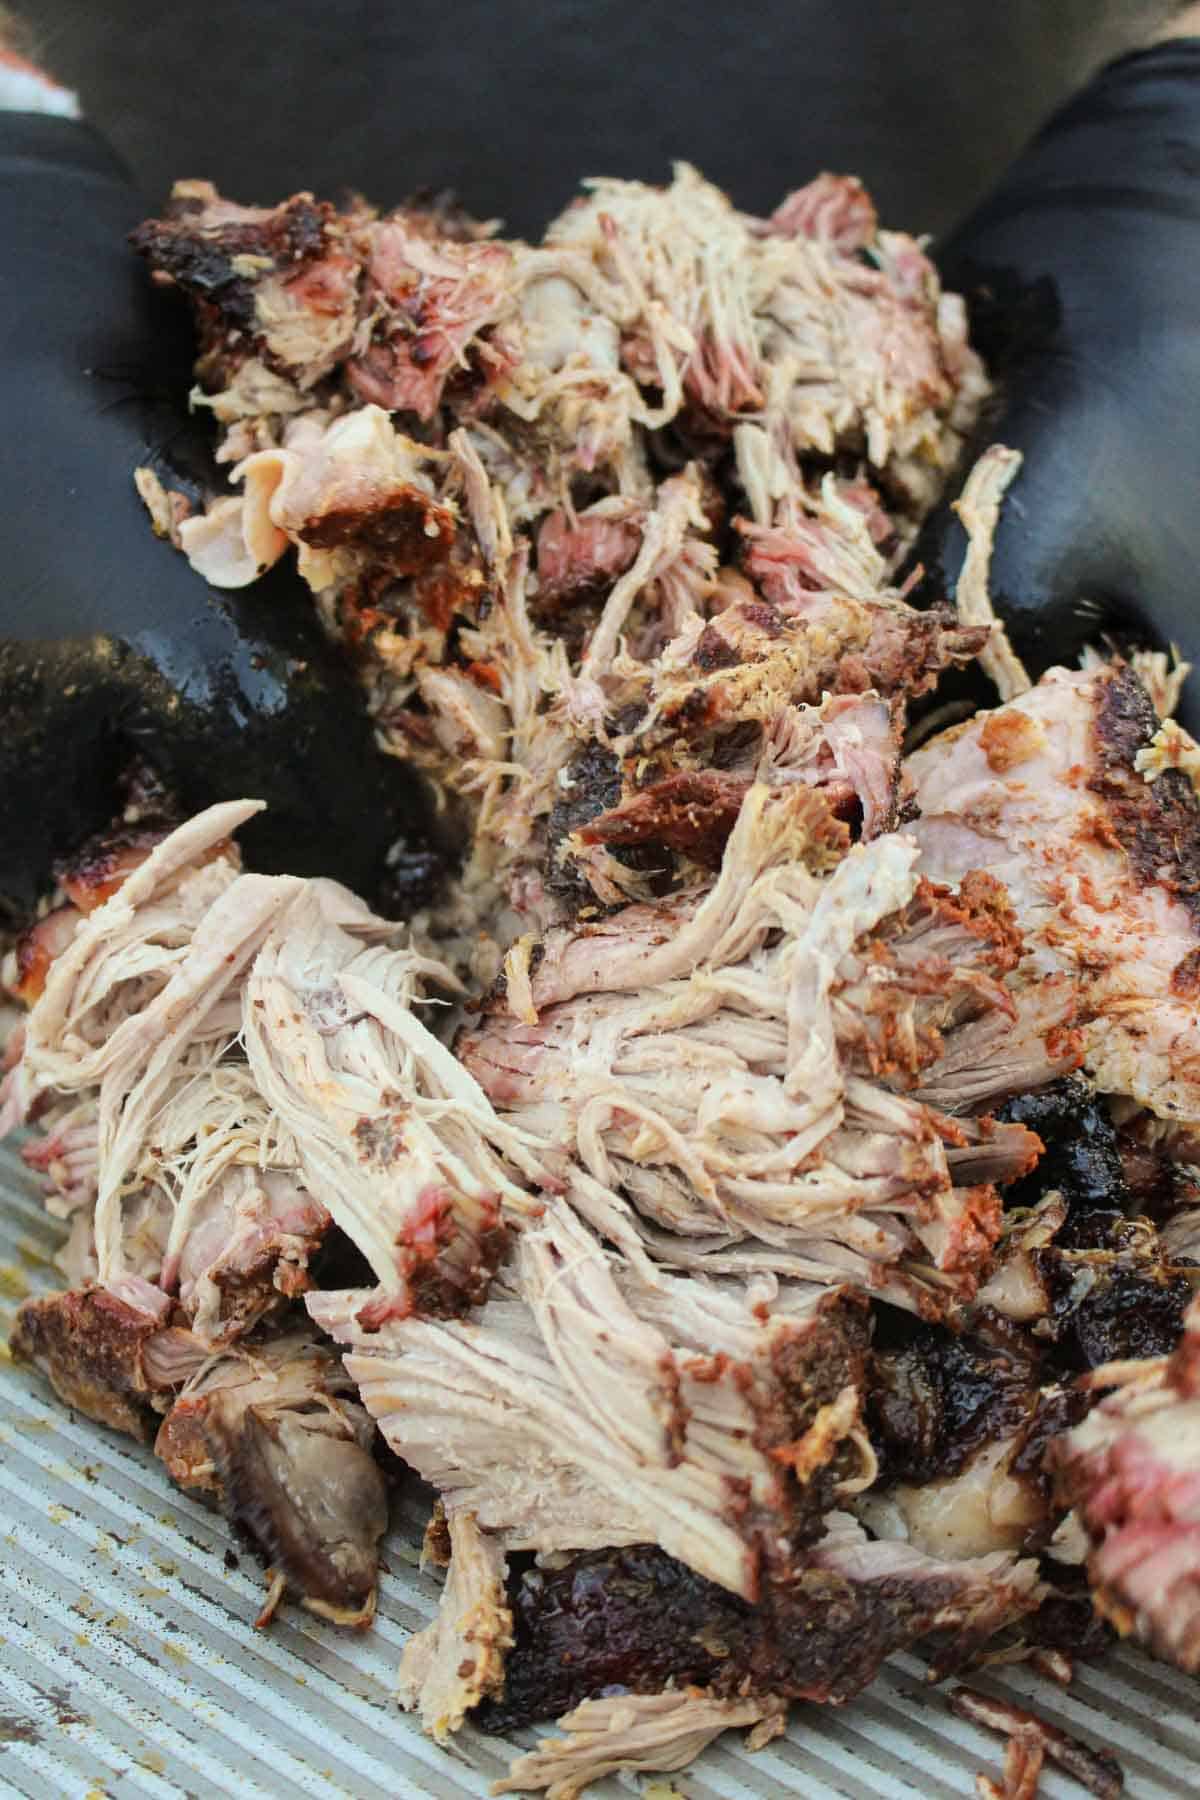 A close up shot of the pulled pork being shredded.